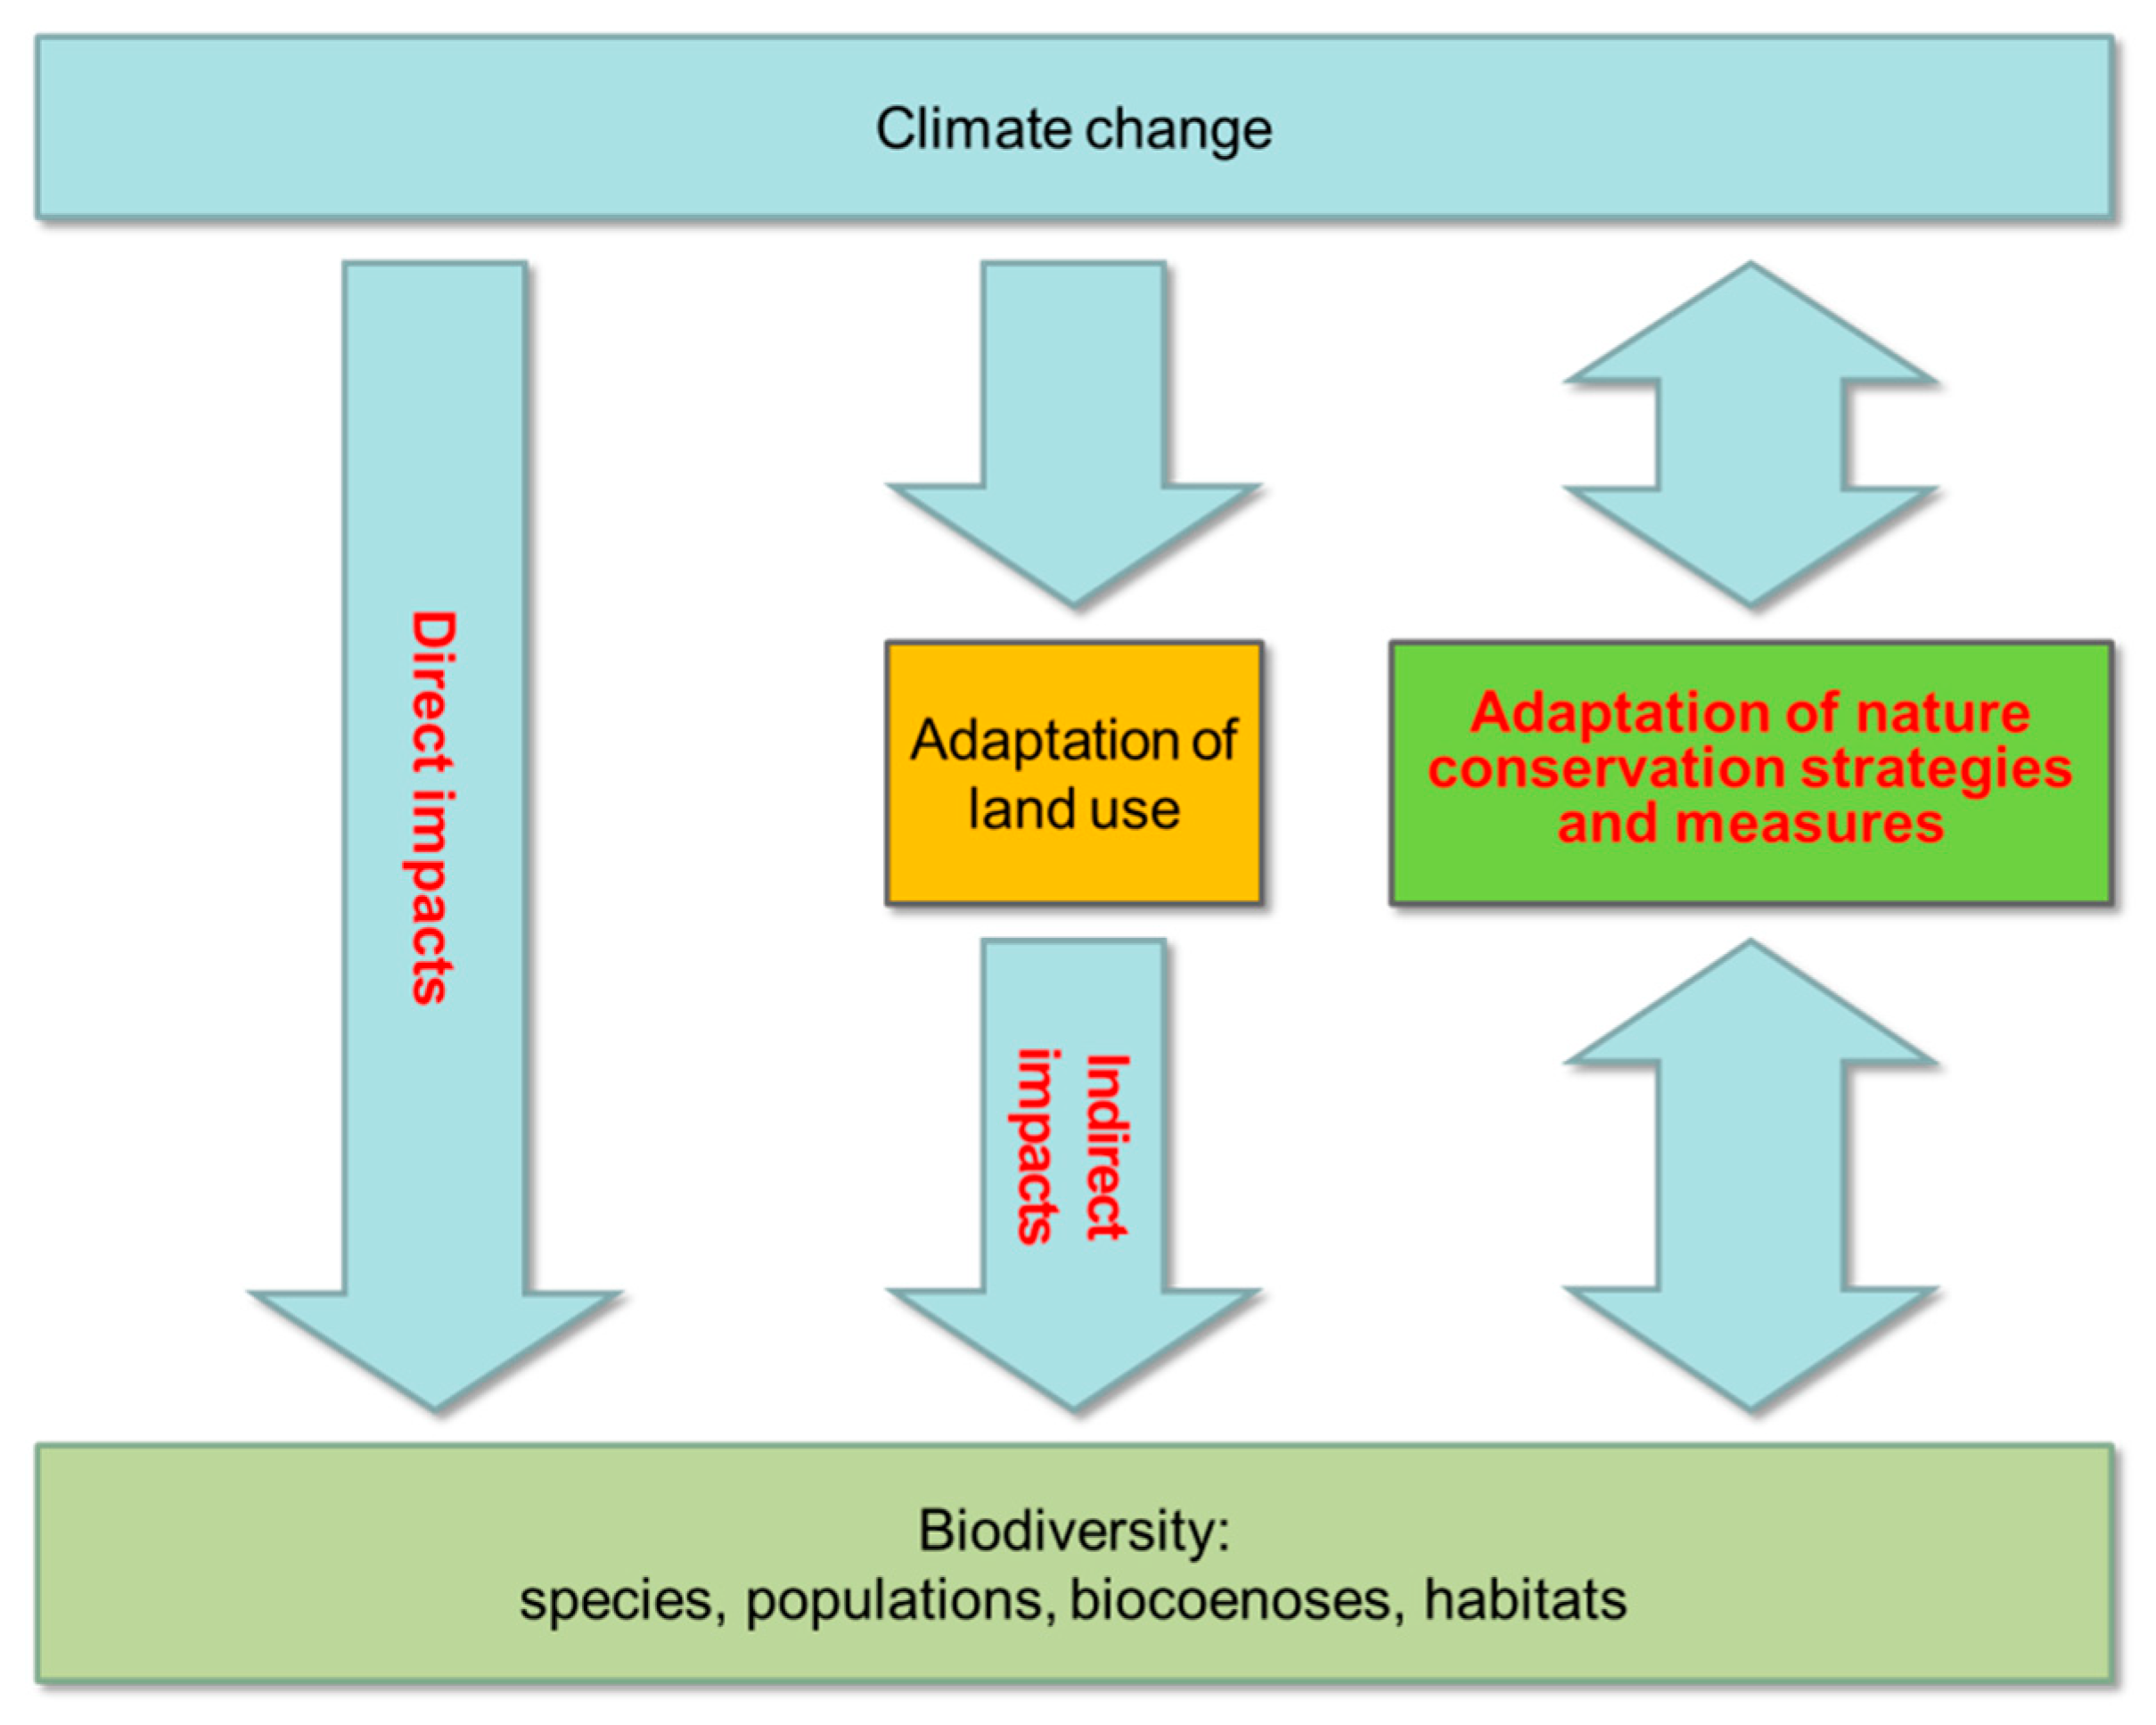 IV. Impact of Climate Change on Wildlife Migration Patterns